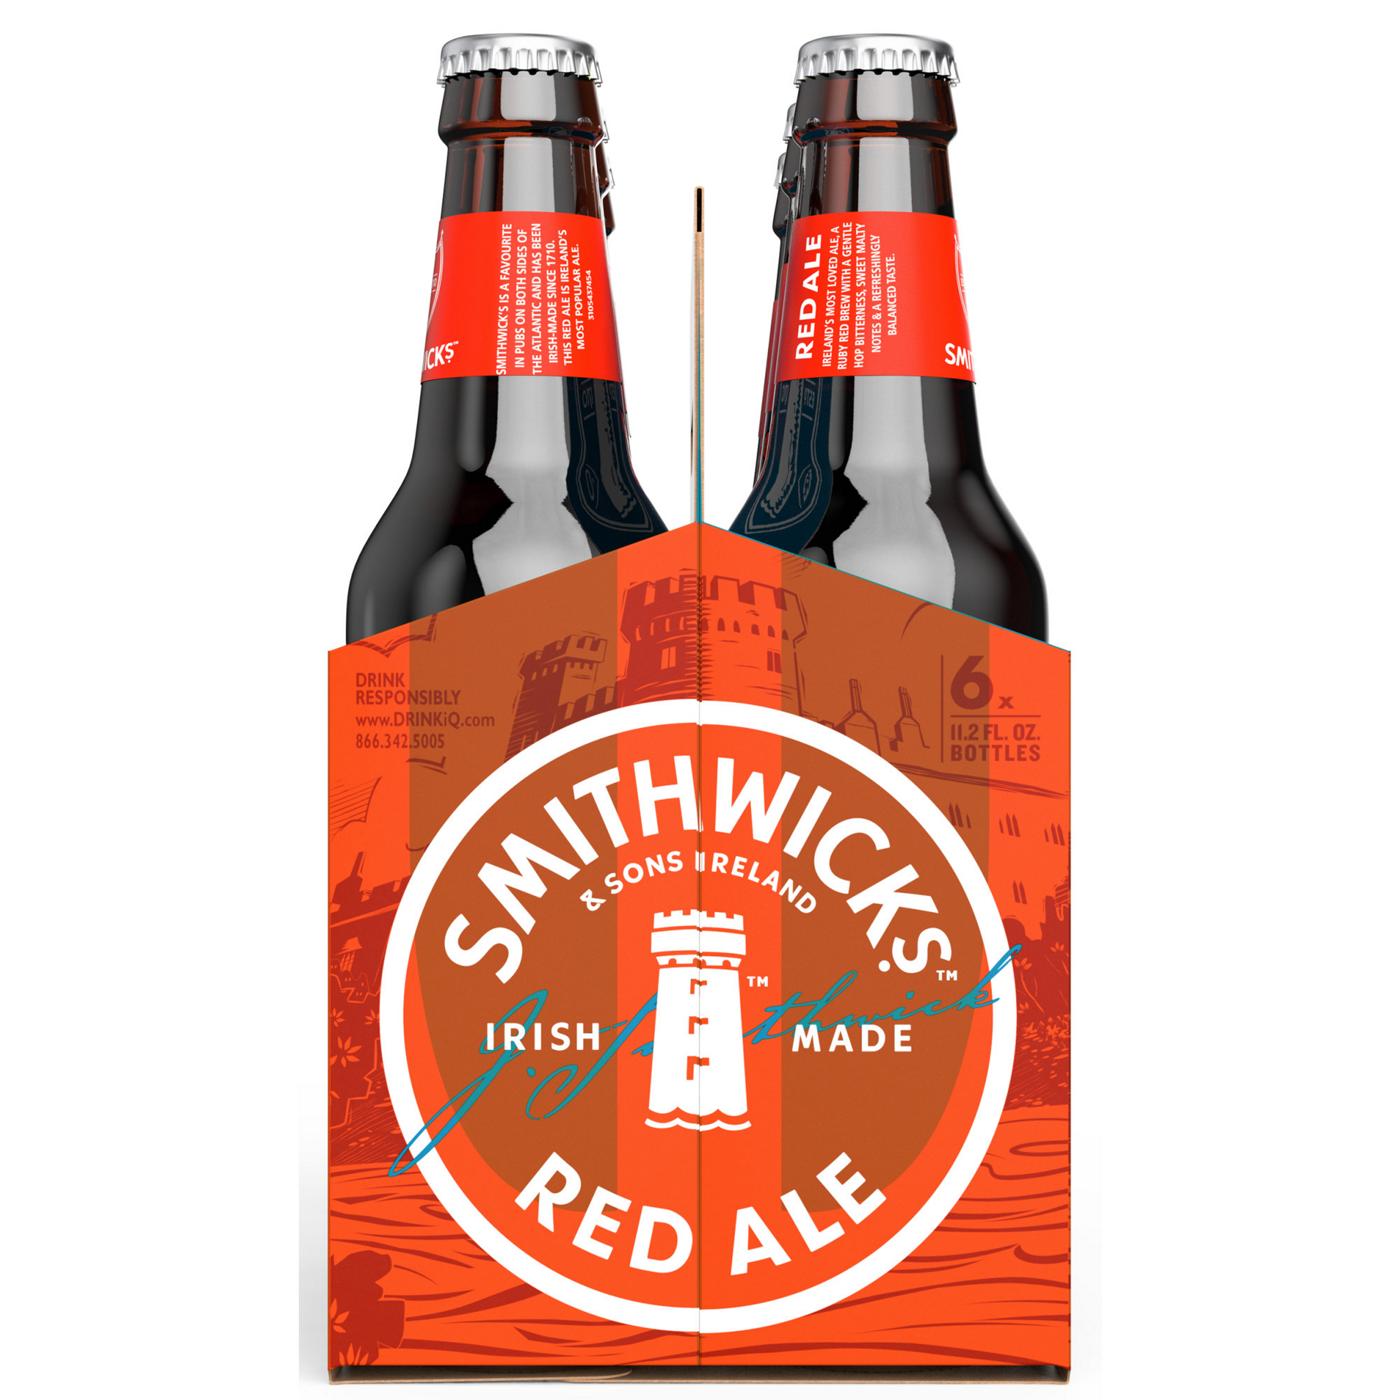 Smithwick's Red Ale Beer; image 3 of 4